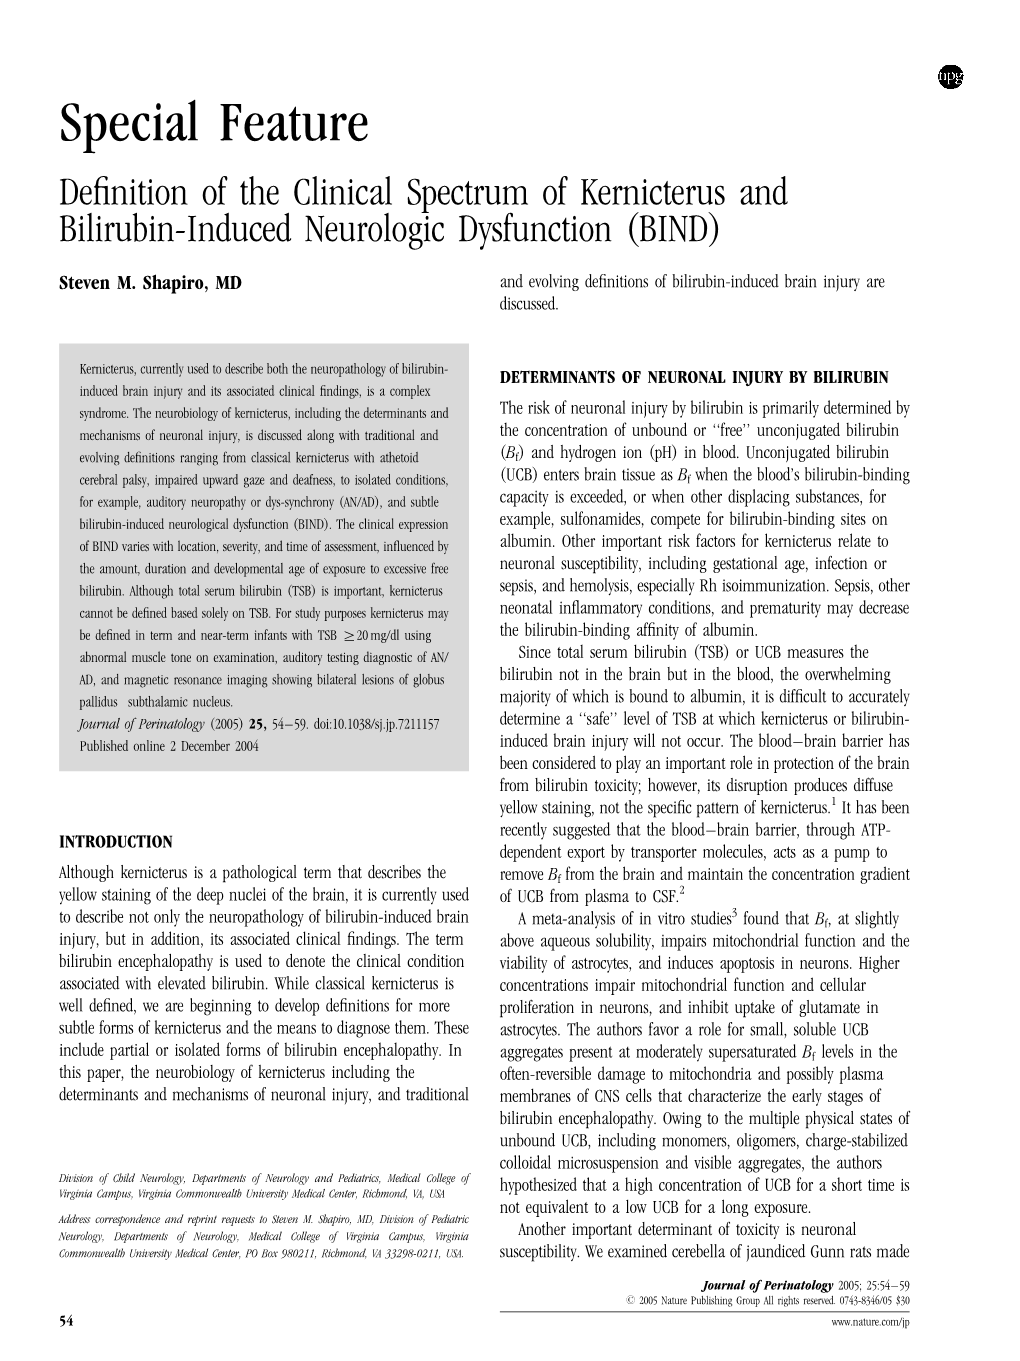 Special Feature Deﬁnition of the Clinical Spectrum of Kernicterus and Bilirubin-Induced Neurologic Dysfunction (BIND)